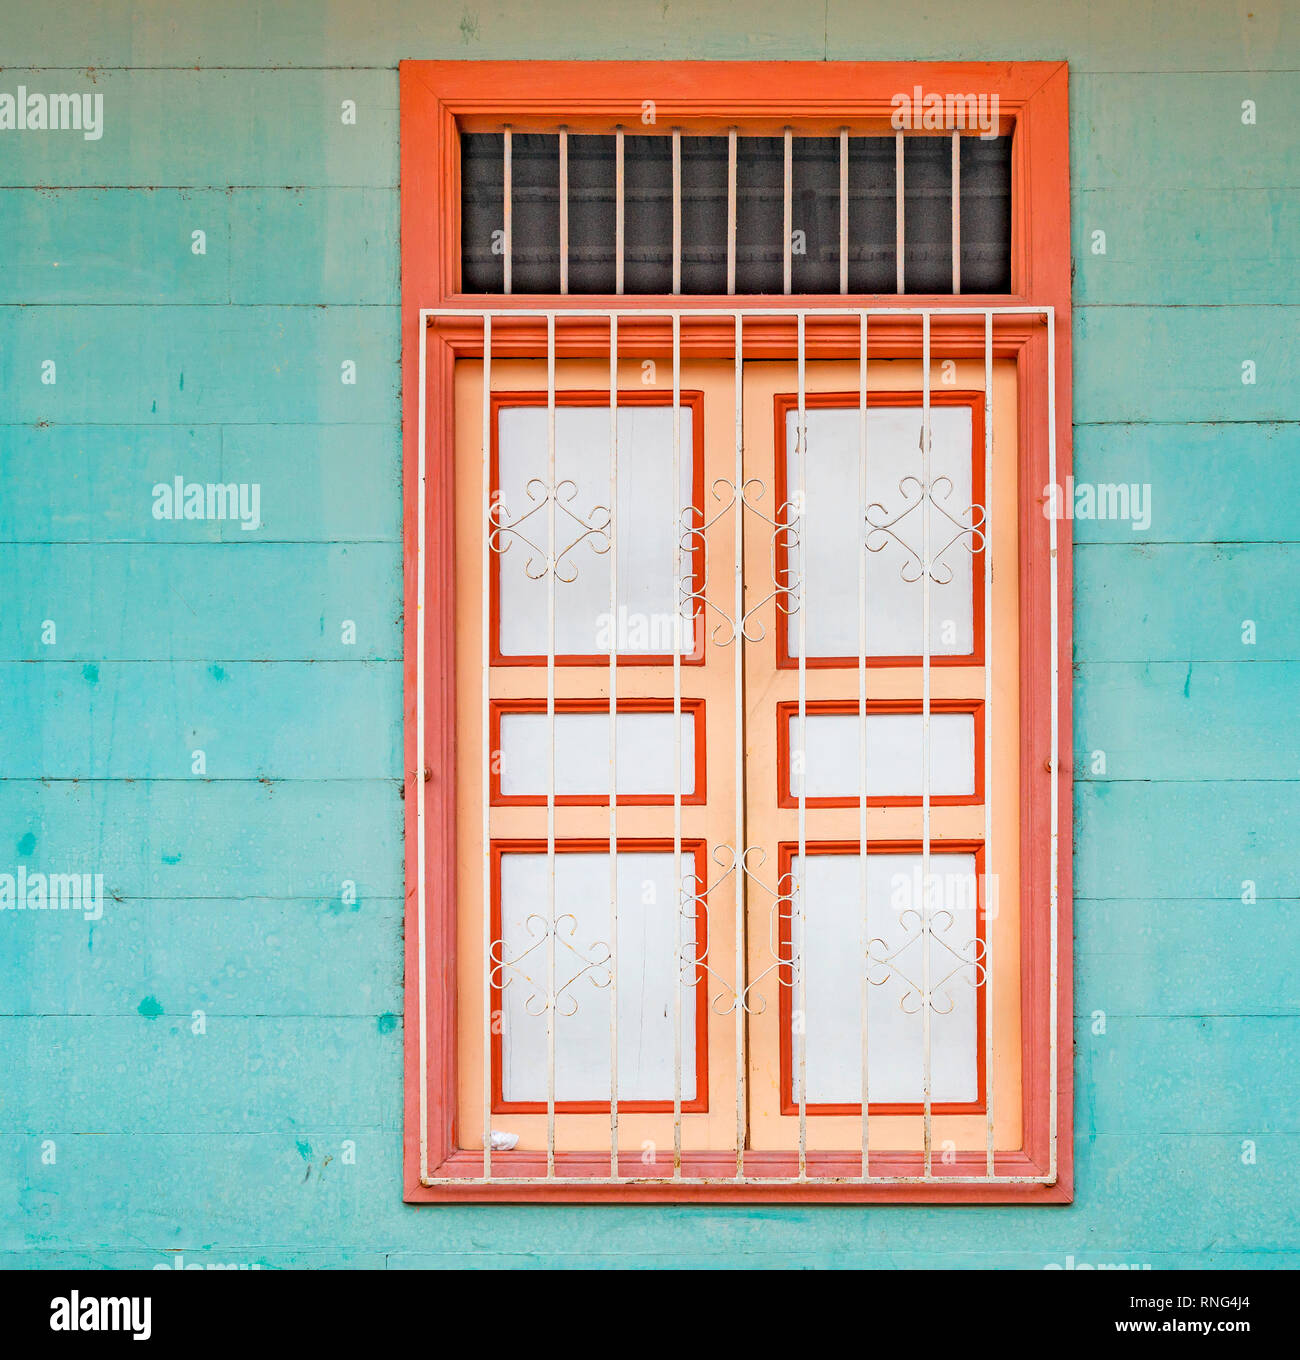 Square photograph of a turquoise wooden wall with orange and white window in the city center of Guayaquil, Ecuador. Stock Photo